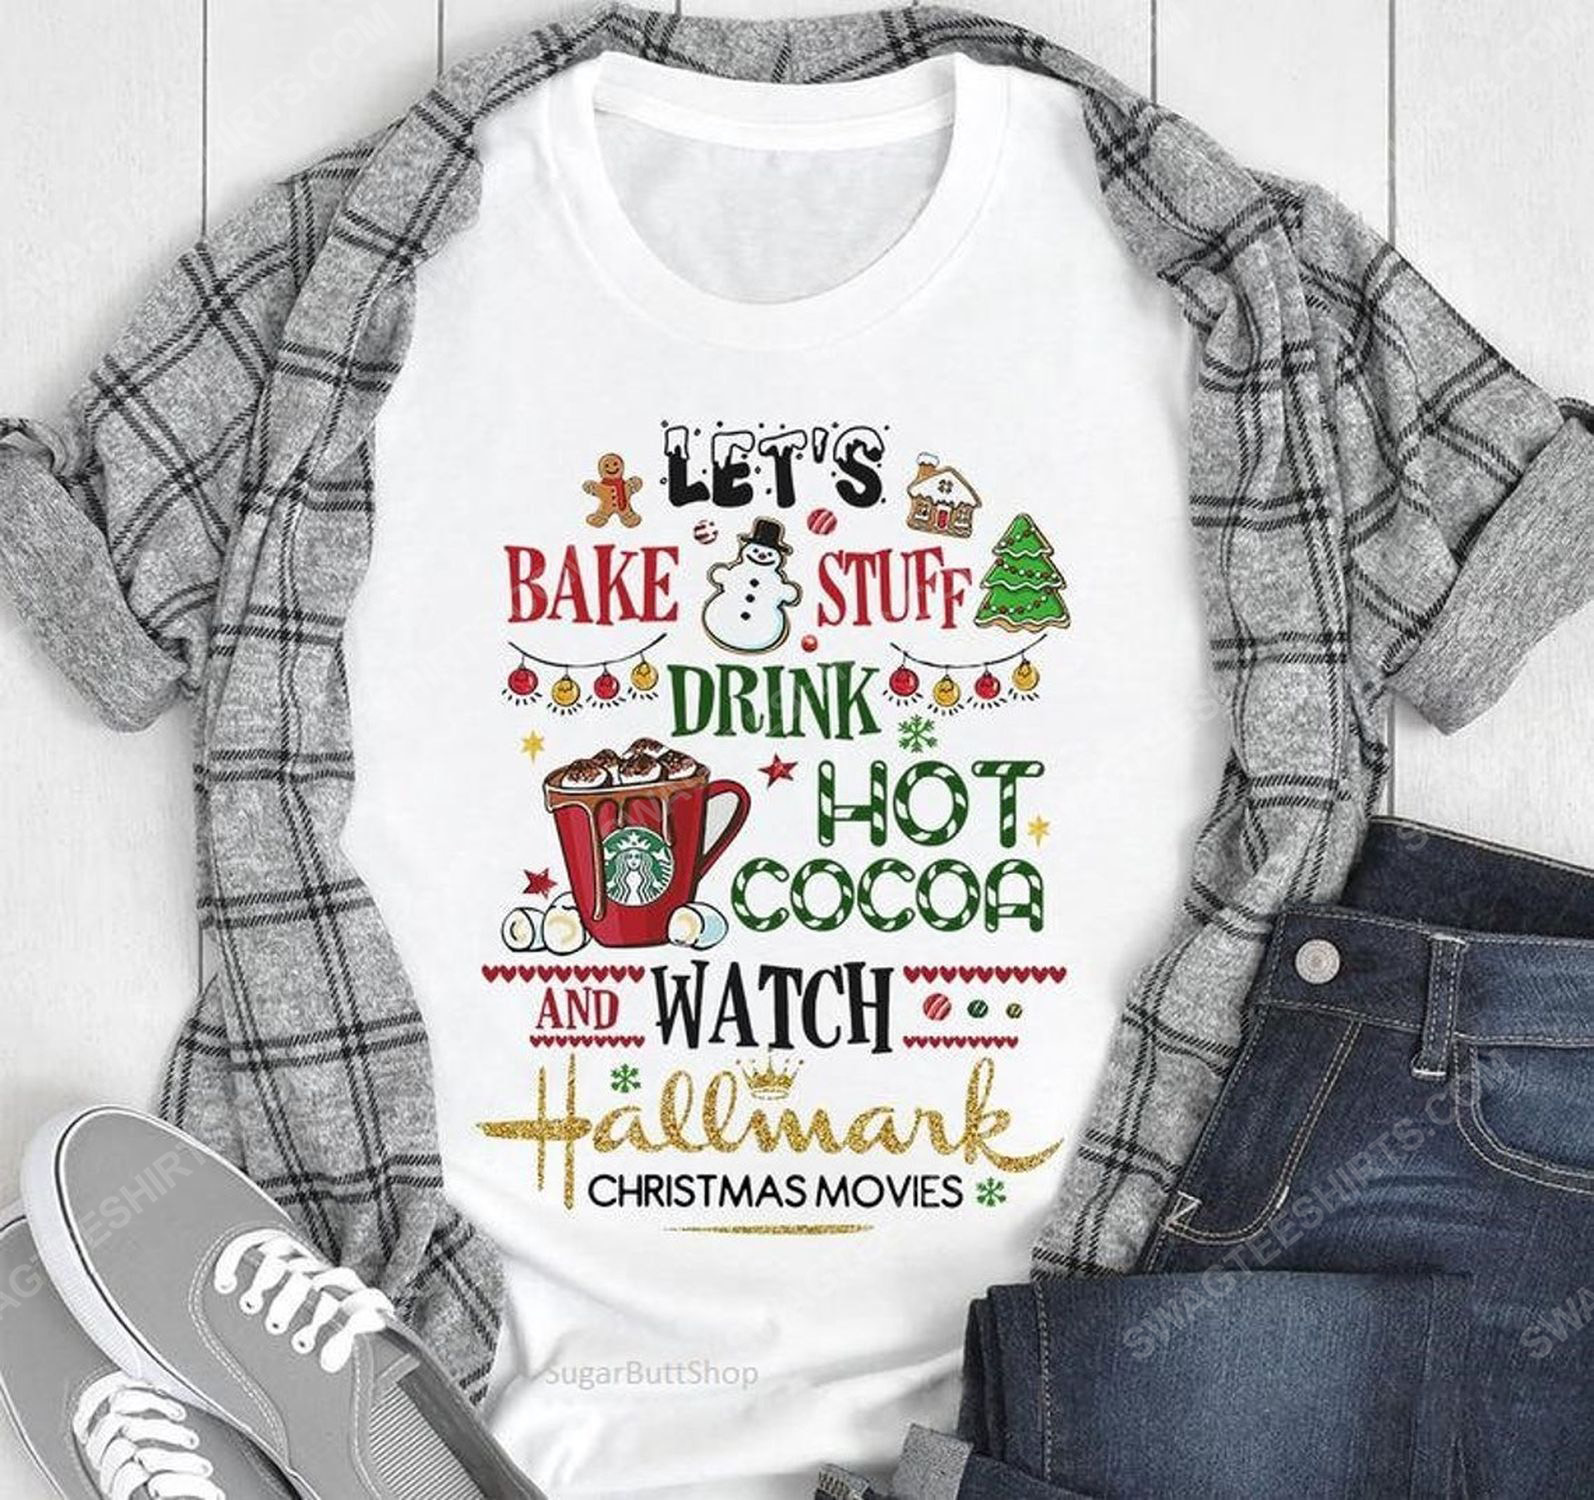 It's a hot cocoa fire place flannelpjs hallmark channel kind of day shirt 3